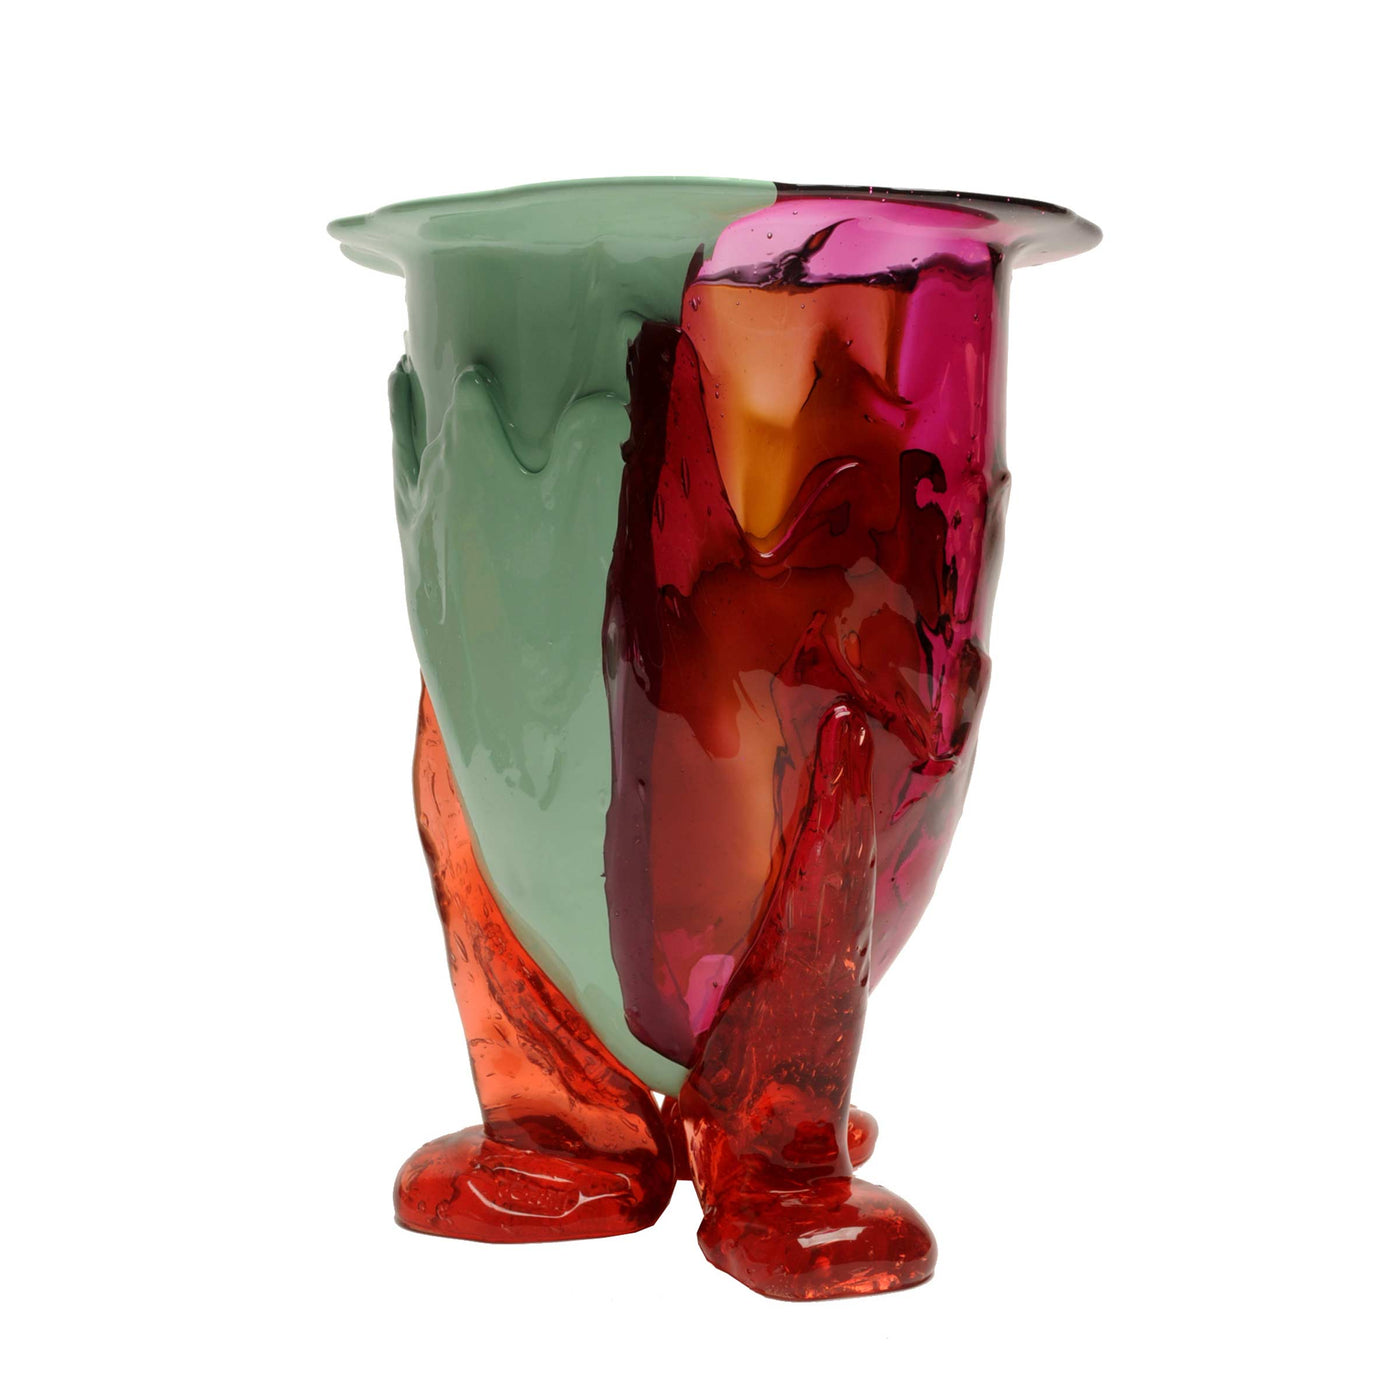 Resin Vase AMAZONIA Matt Mint, Clear Brown, Fuchsia and Pink by Gaetano Pesce for Fish Design 02